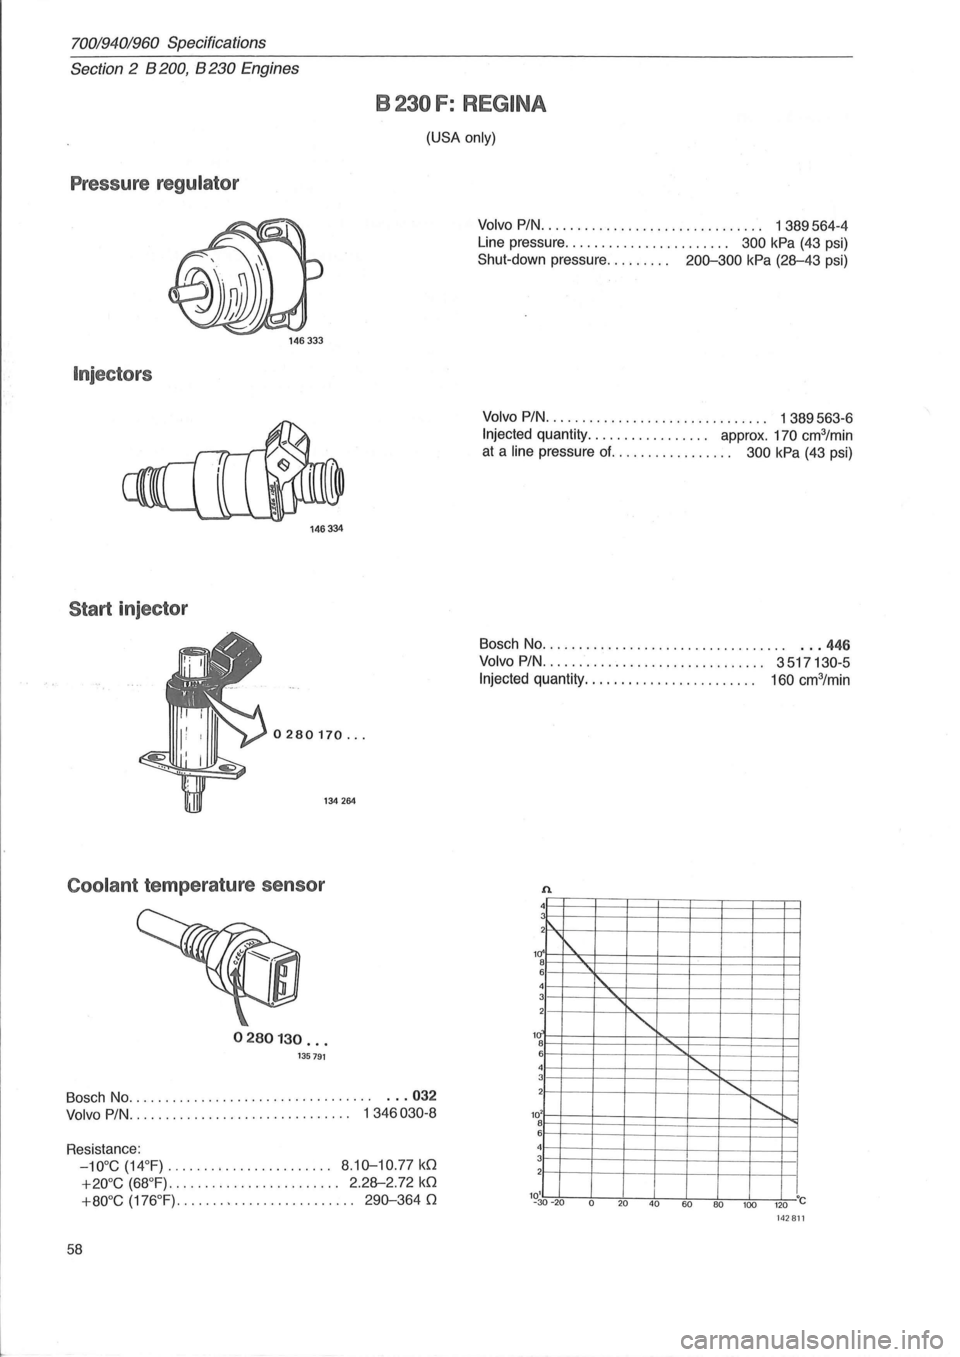 VOLVO 940 1982  Service Repair Manual 70019401960 Specifications 
Section 
2 B 200, B 230 Engines 
B 230 F: REGINA 
(USA only) 
Pressure regulator 
Inj ecto
rs 
146334 
Start injector 
0280170 ... 
134  264 
Coolant temperature  sensor 
0